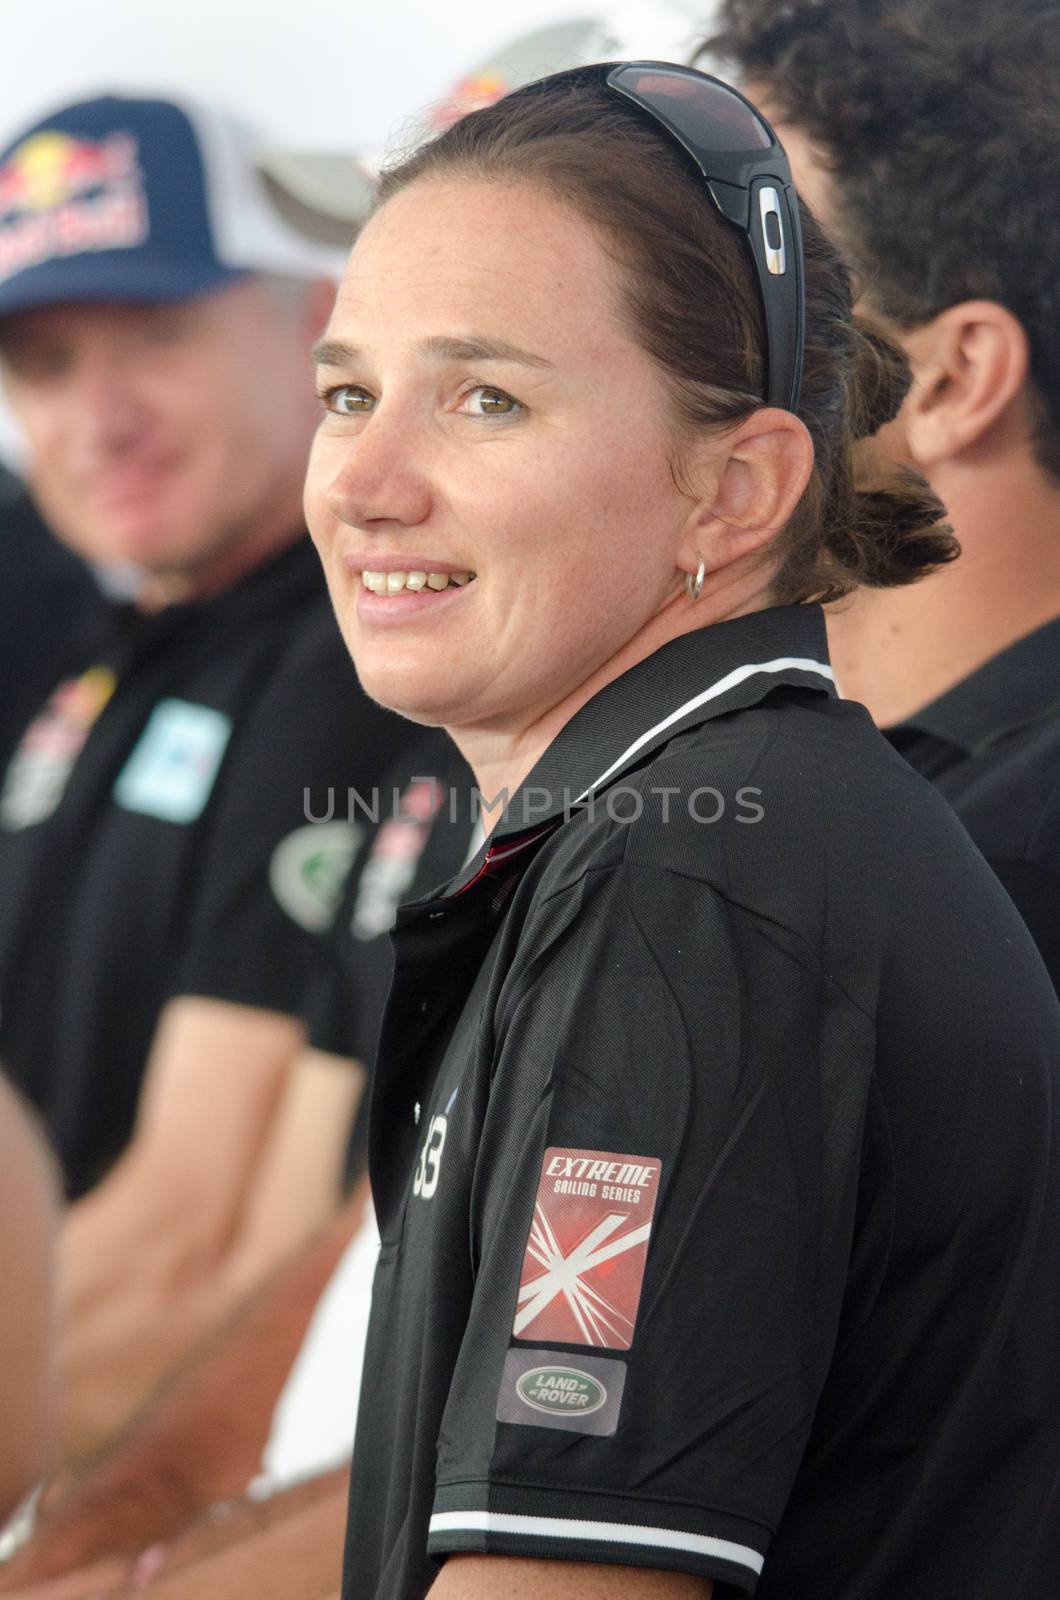 AUSTRALIA, Sydney: The Extreme Sailing Series has kicked off with a press conference in Sydney on December 10, 2015. The racing takes place over four days from 10-13 December, 2015. Katie Spithill pictured. 